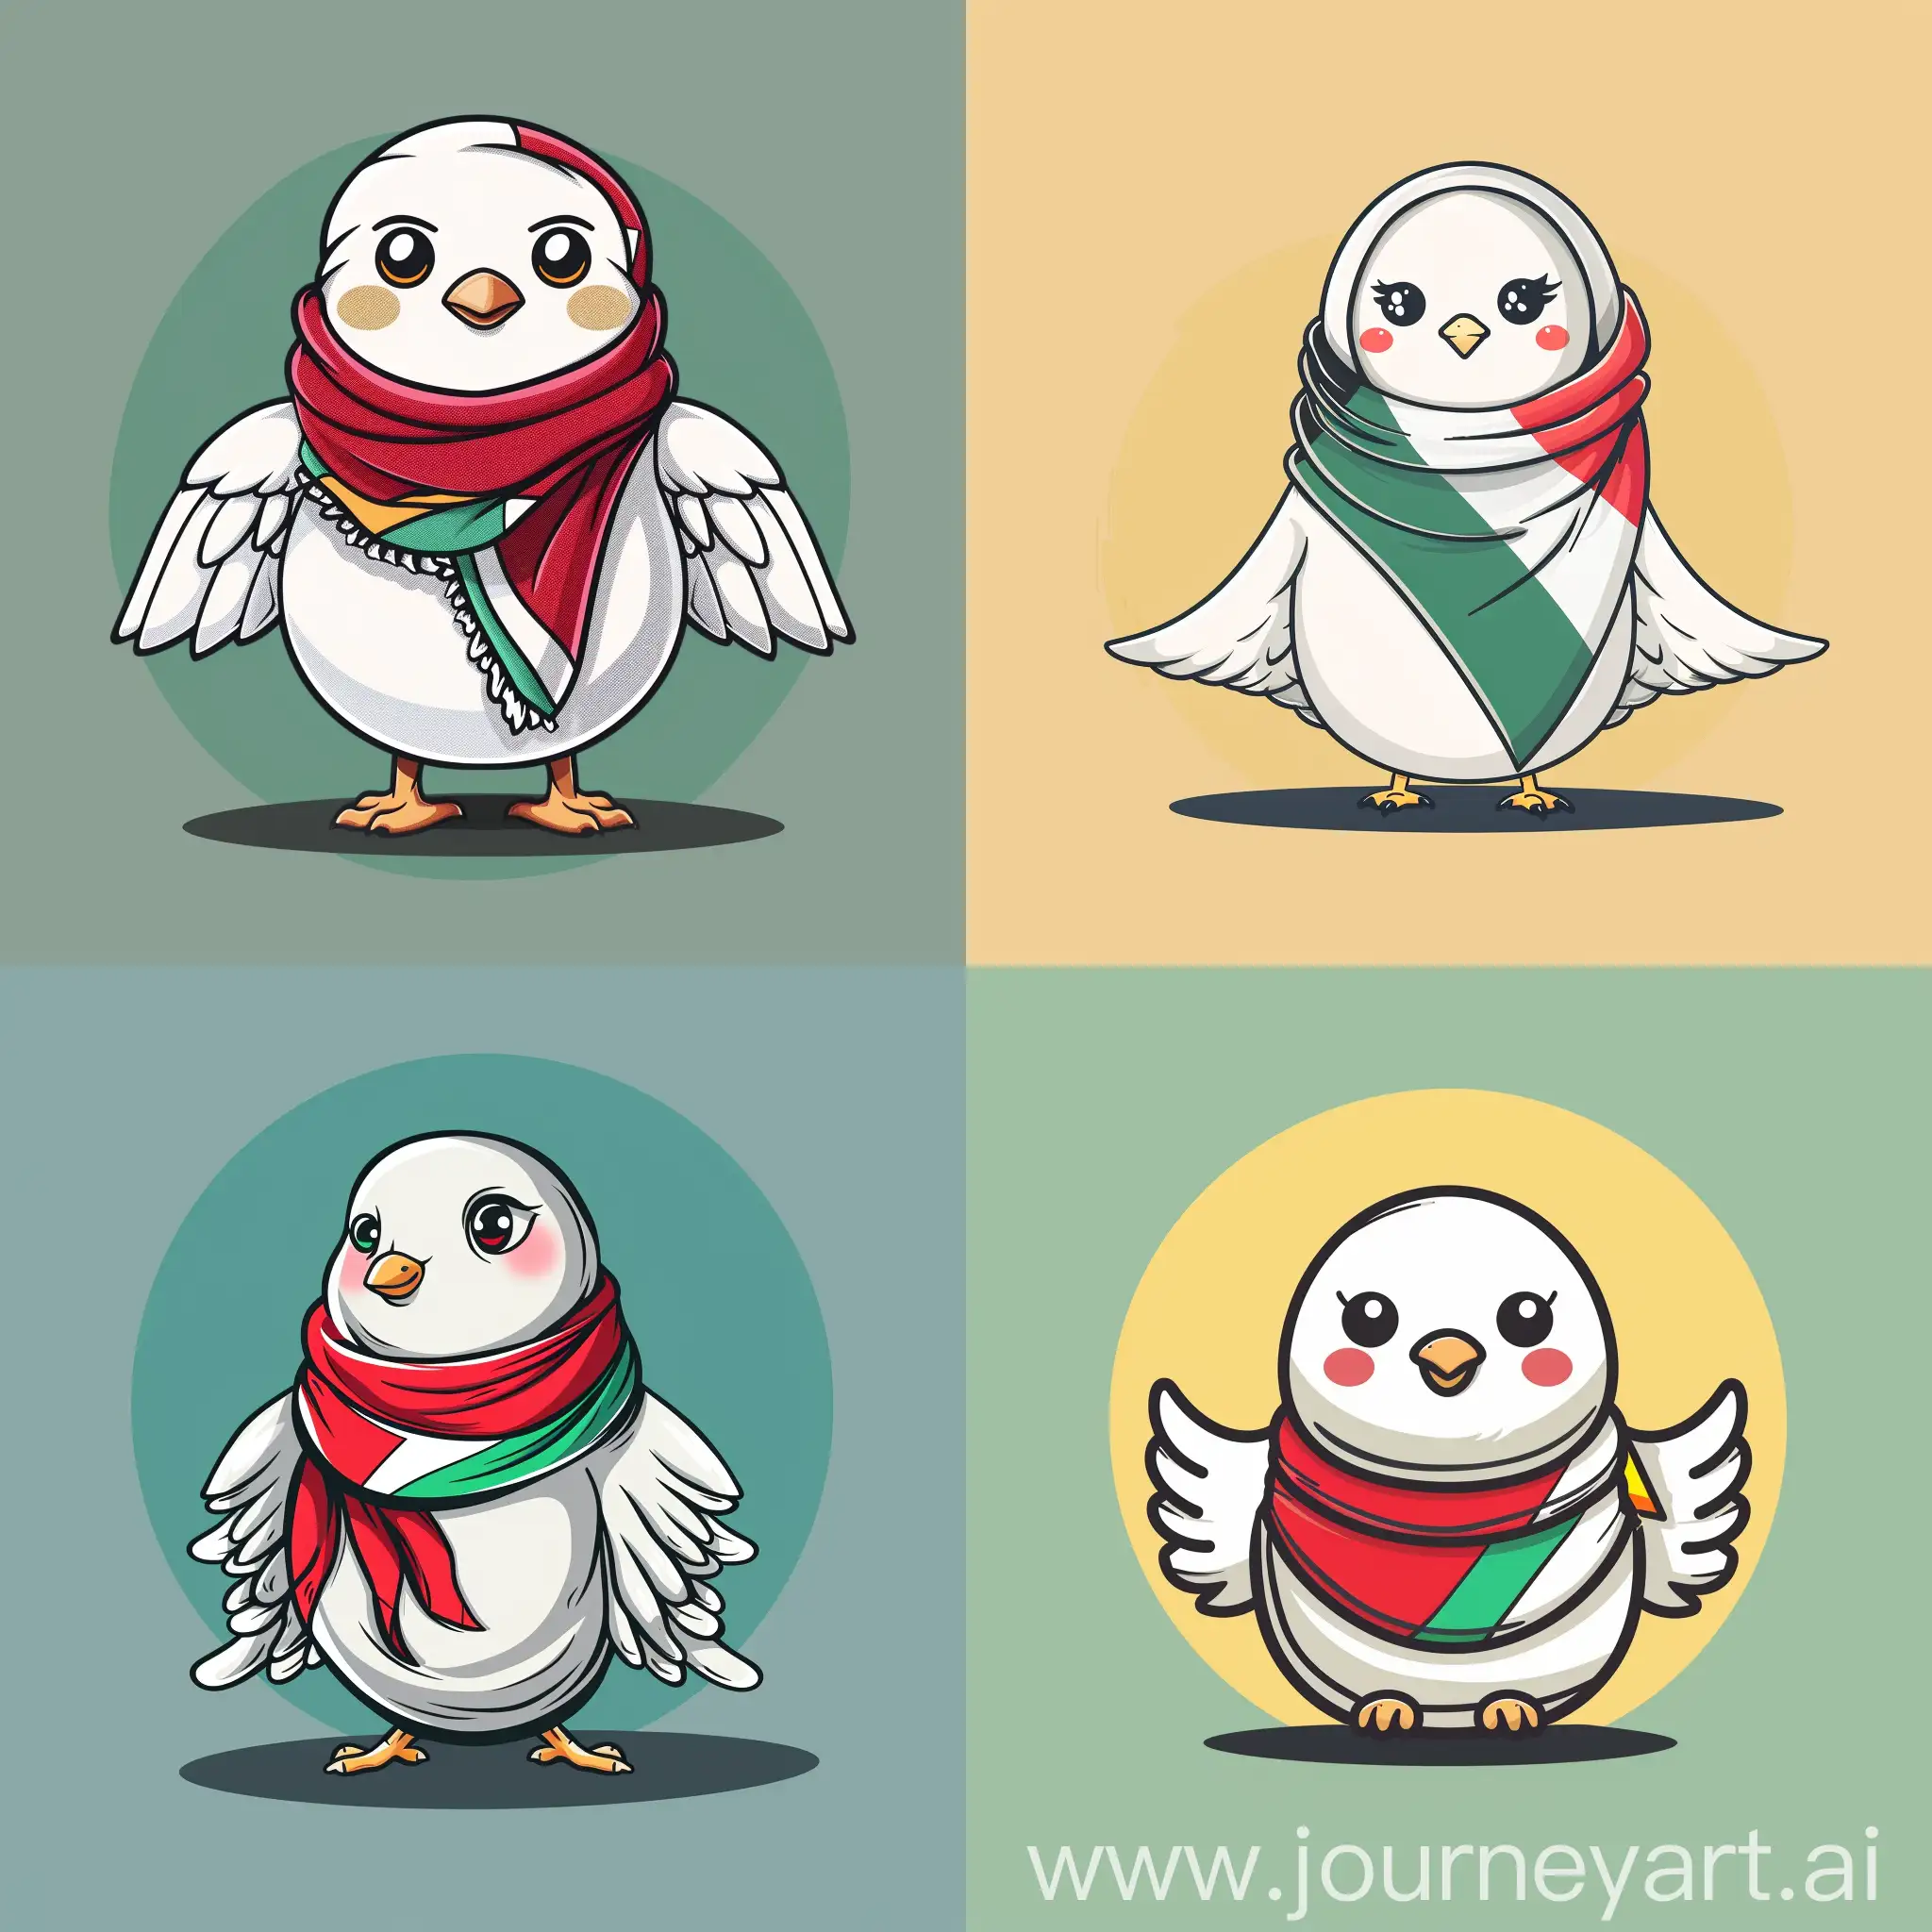 White dove mascot wearing a Palestinian scarf or flag for a meme coin to generate aid for gaza